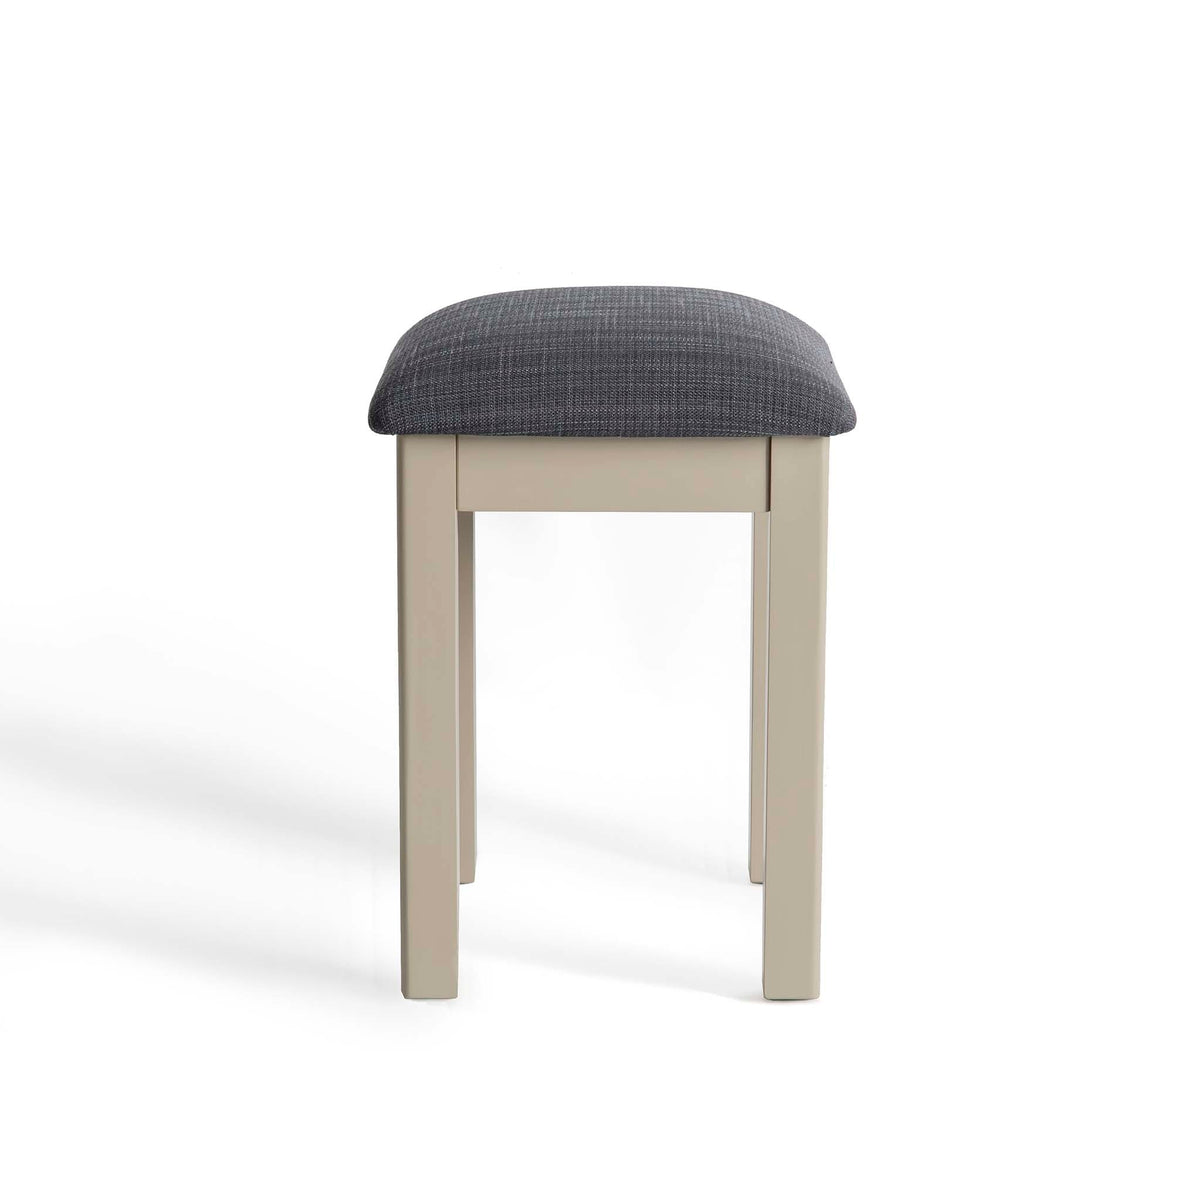 The Padstow Stone Grey Dressing Table Stool  -  Side on View